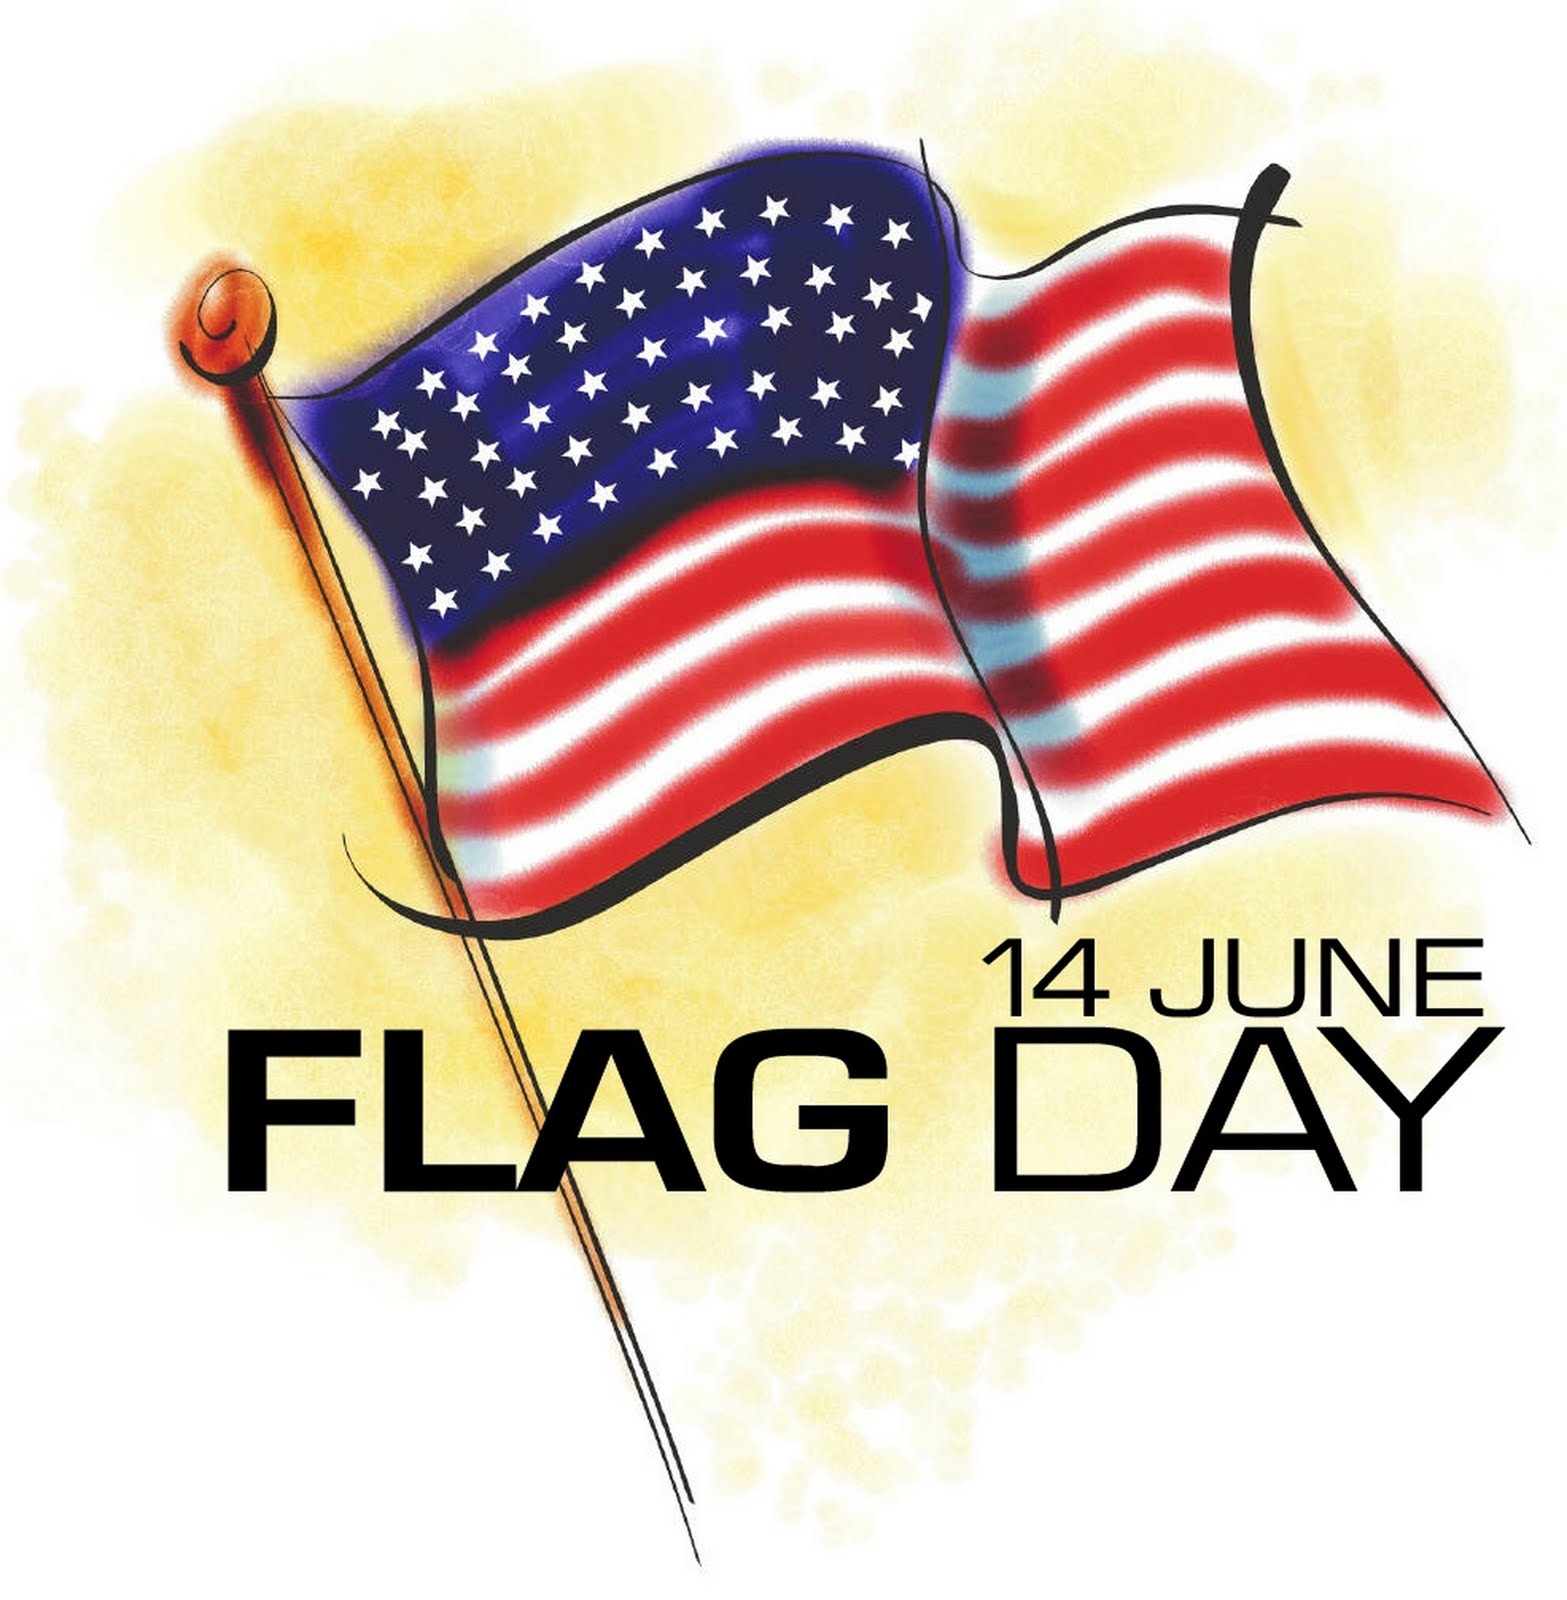 Flag Day June 14th Public Domain Clip Art Photos and Images